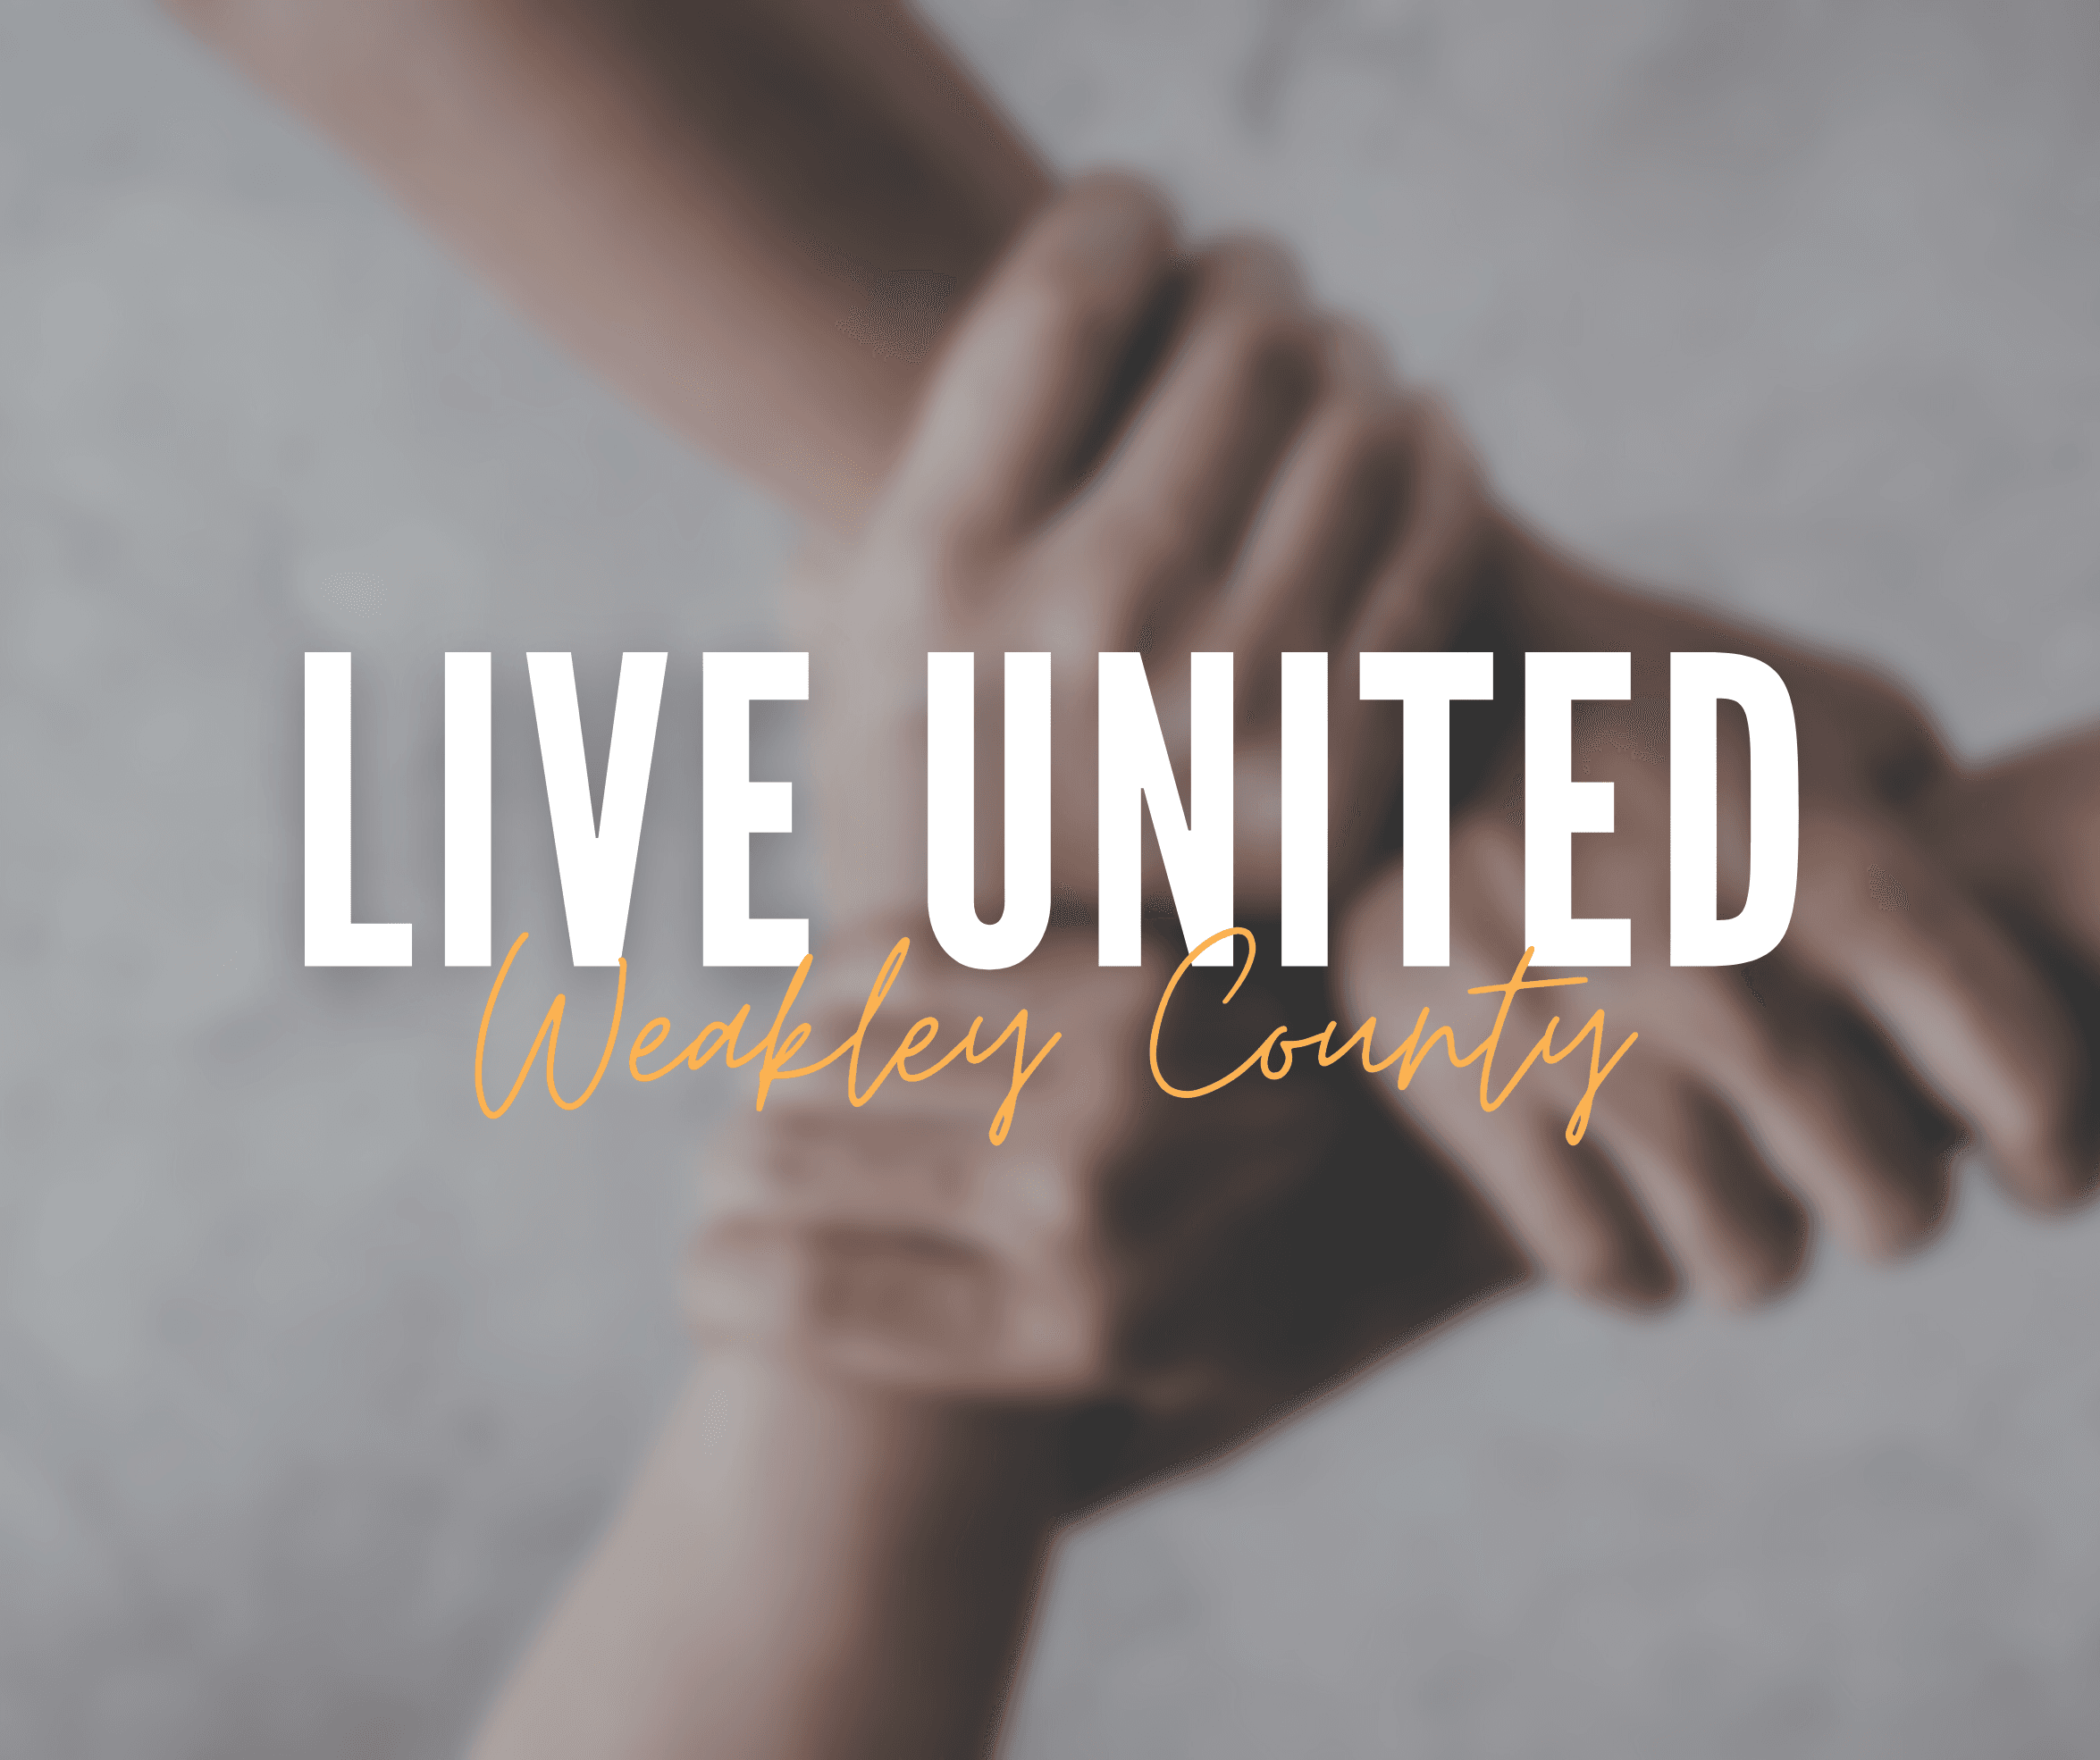 United Way Partners with Weakley County to Celebrate LIVE UNITED 2022